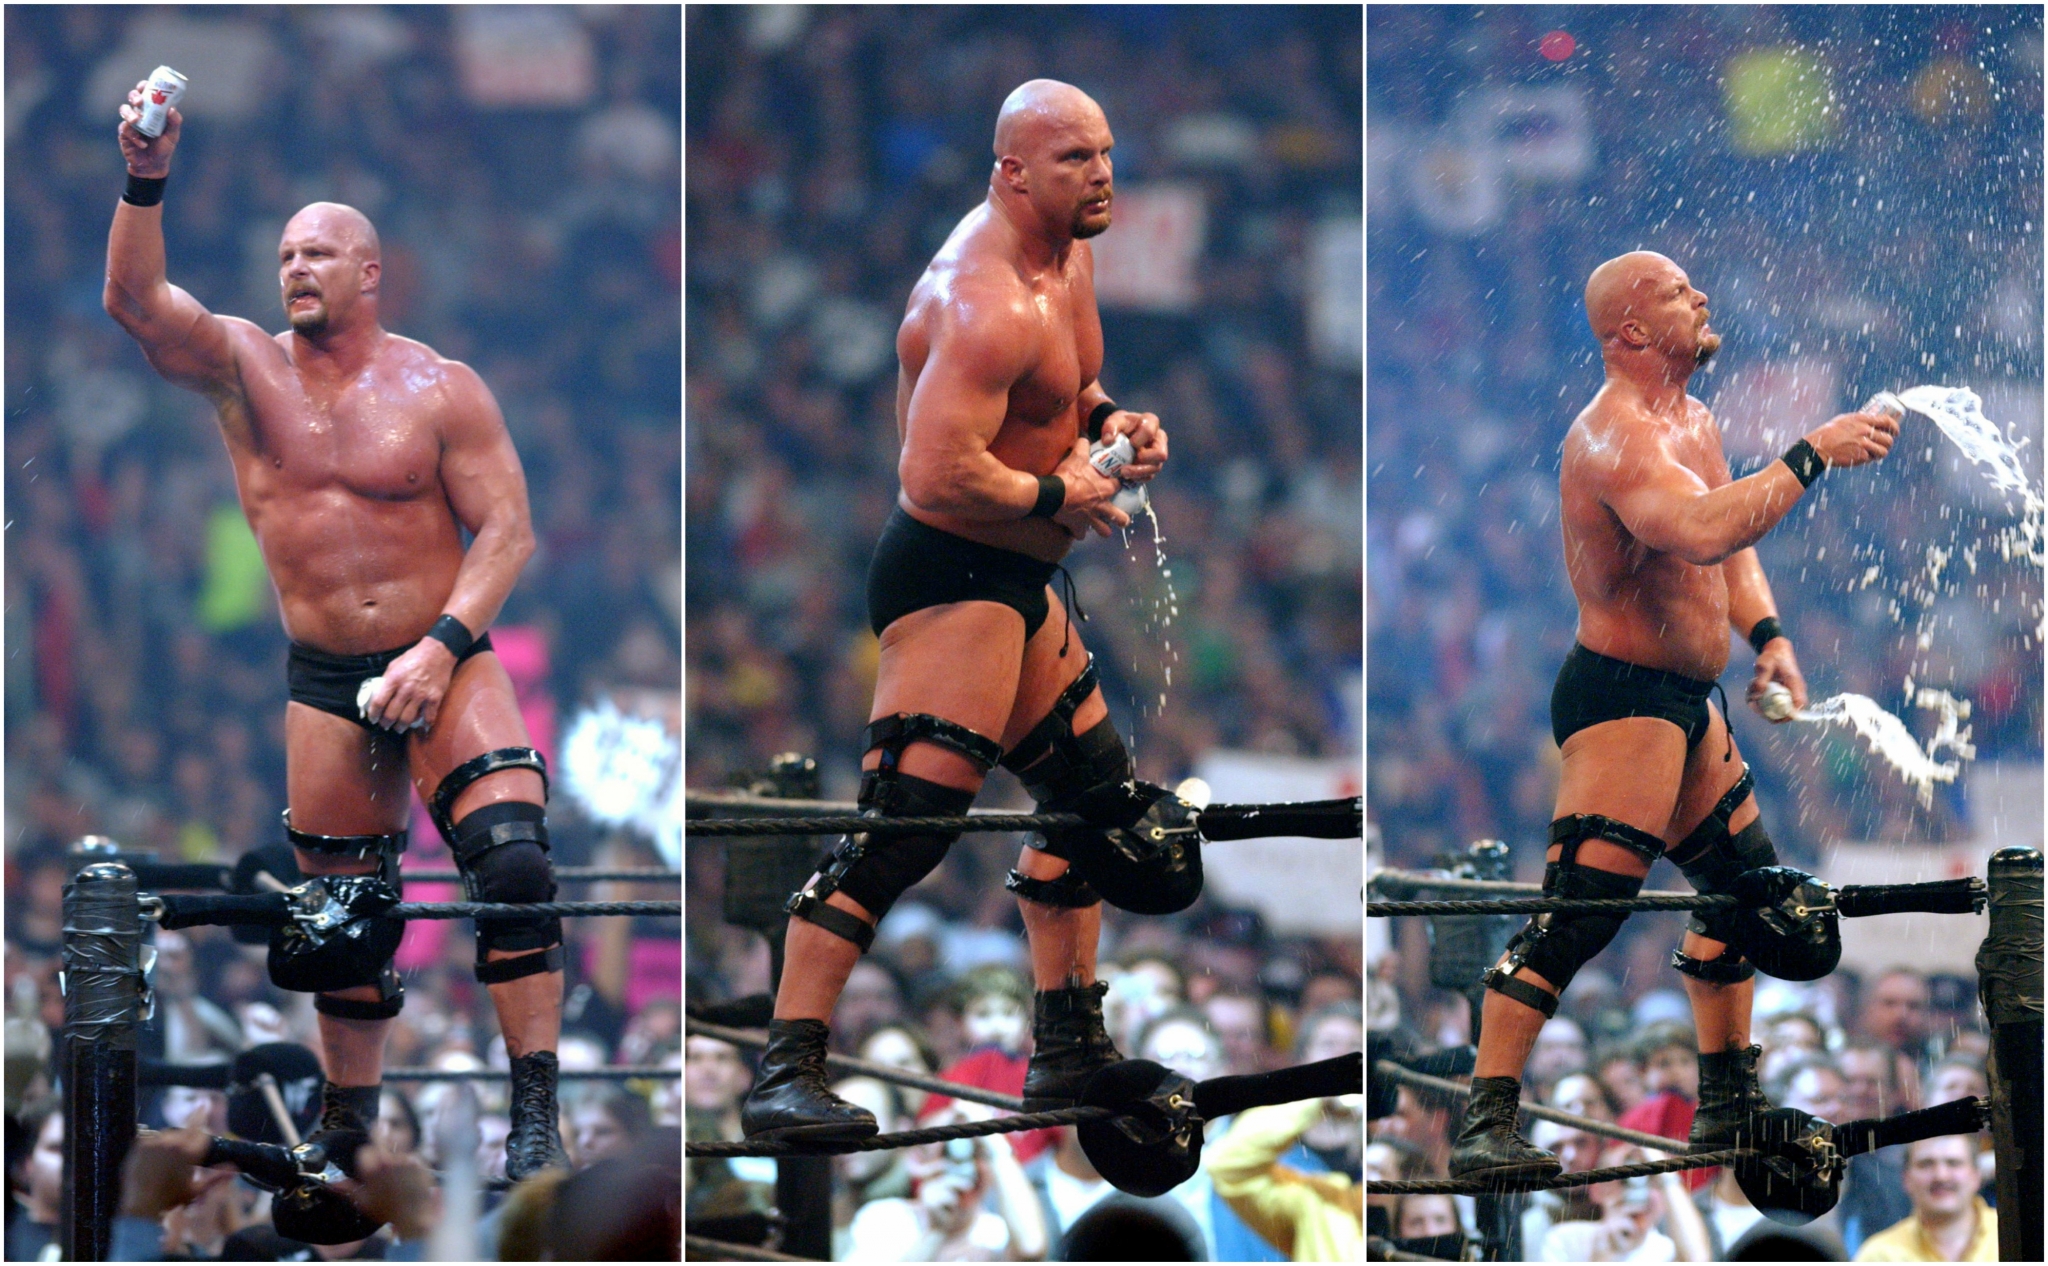 Stone Cold Talks About His Beer Habit In The Ring During His Wwe Heyday